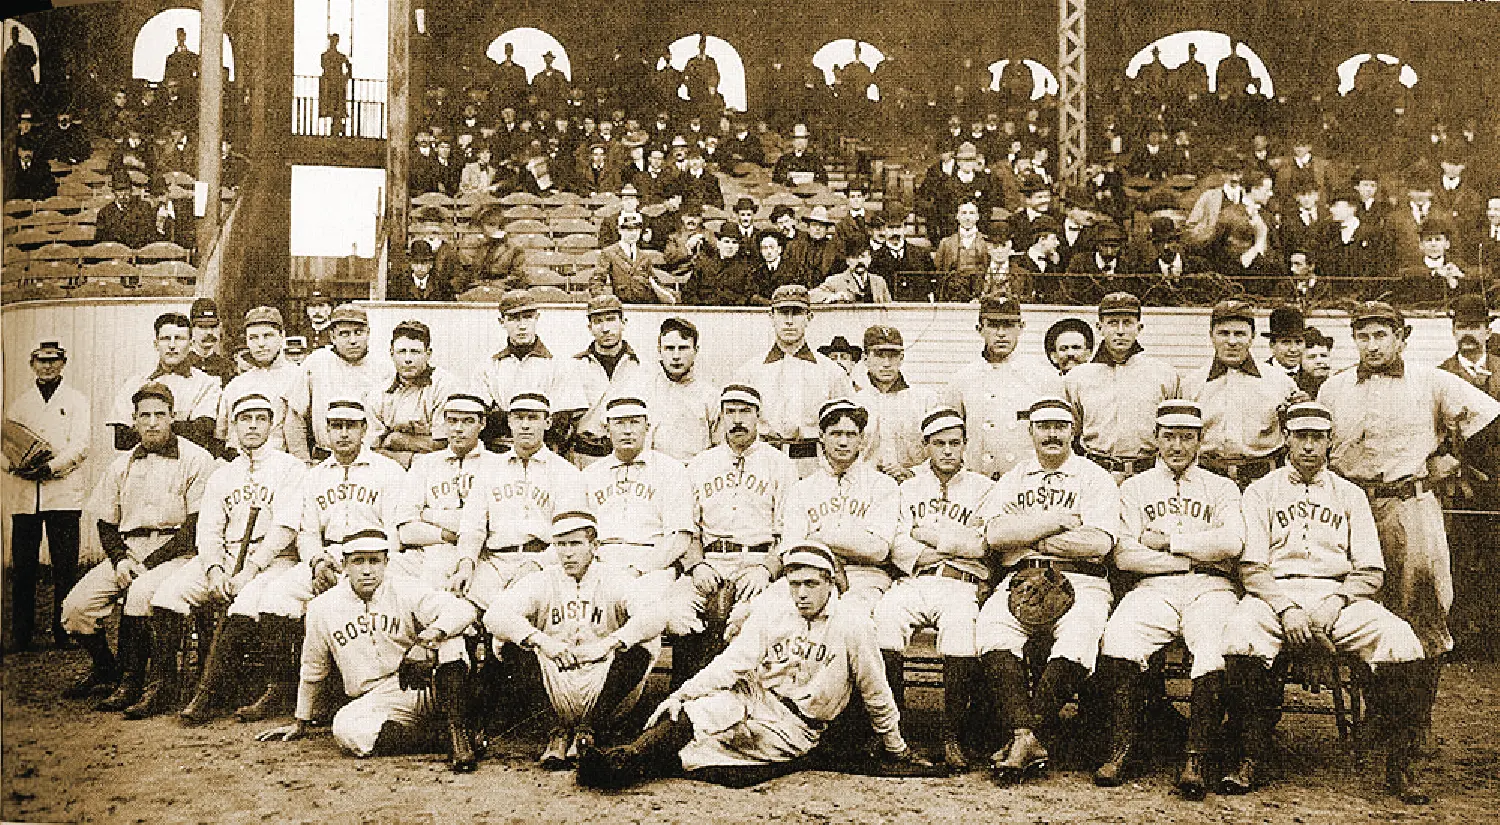 A dated photo of The Pirates posing together.